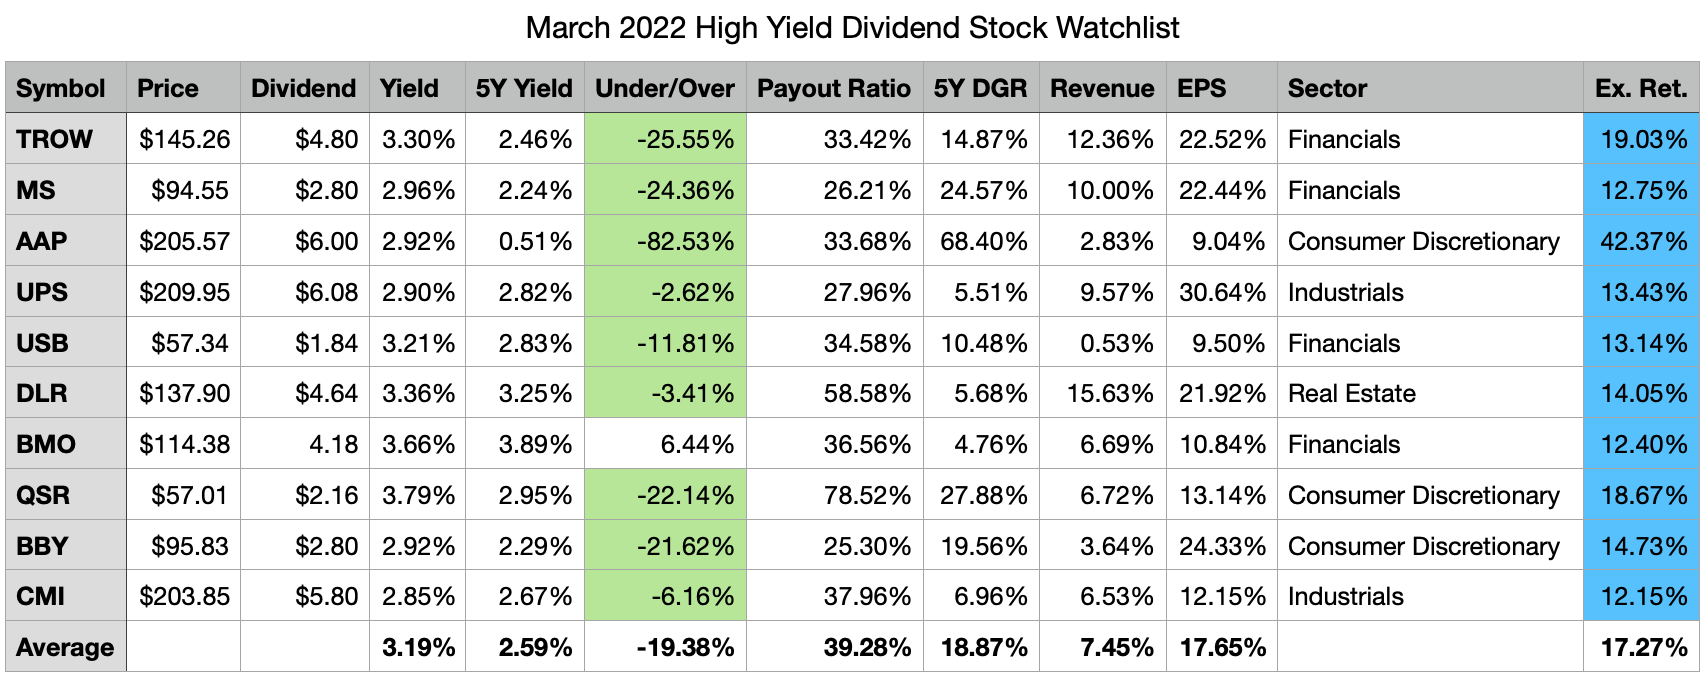 My Top High Yield Dividend Stocks For March 2022 | Seeking Alpha